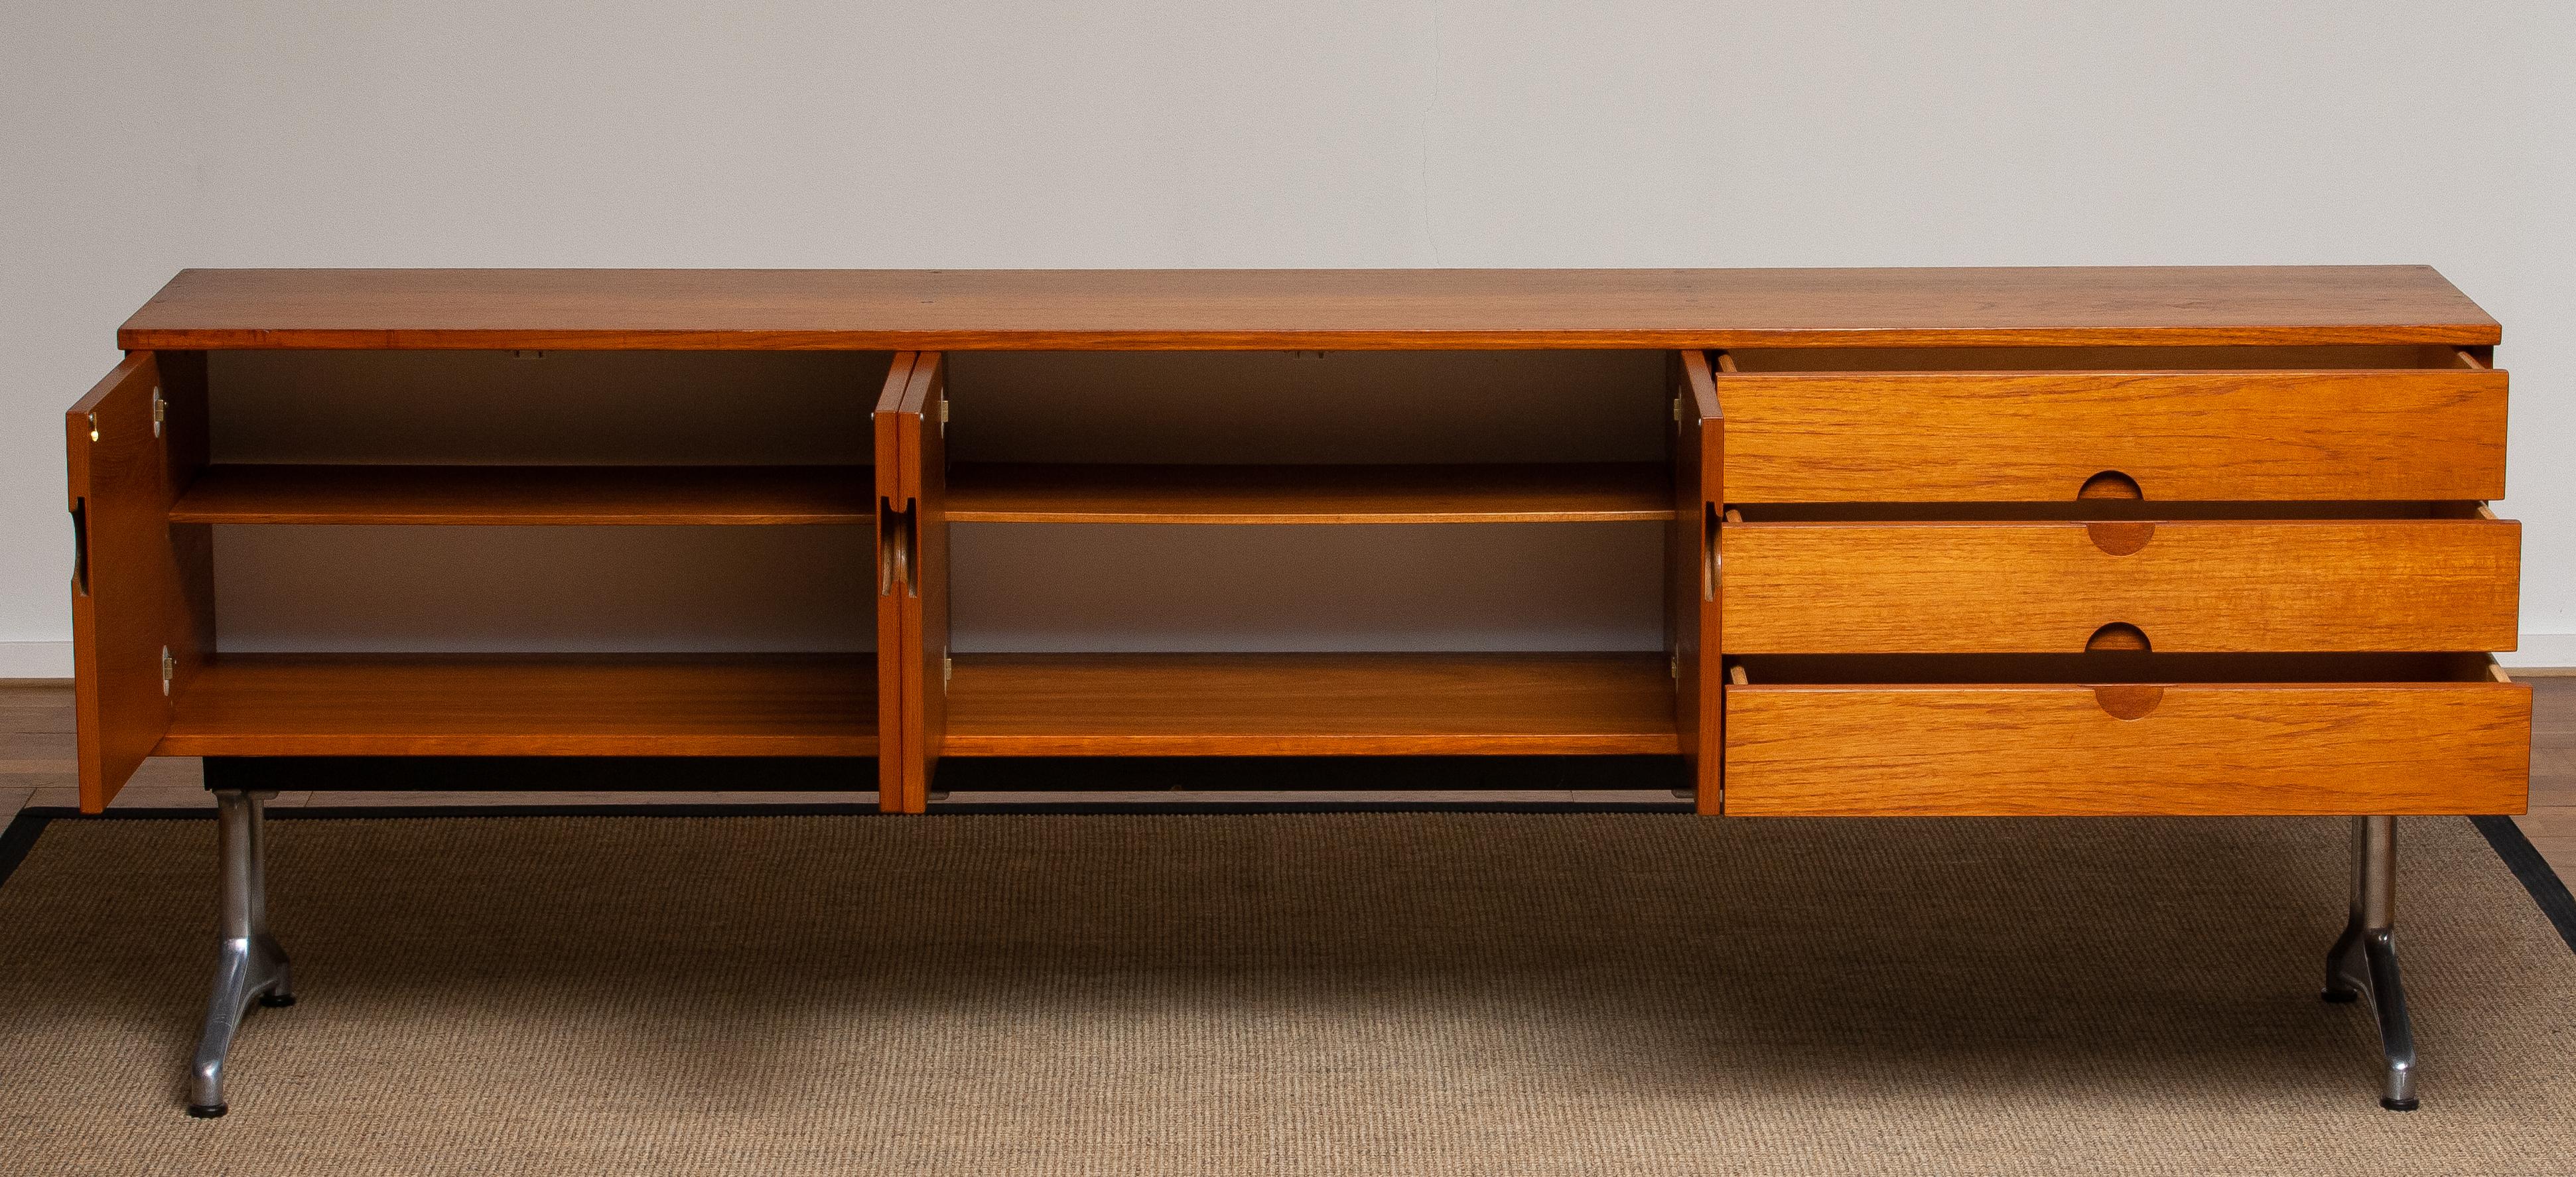 1960s Sideboard / Credenzas in Teak on a Aluminum Stand by Pertti Salmi, Norway In Good Condition In Silvolde, Gelderland